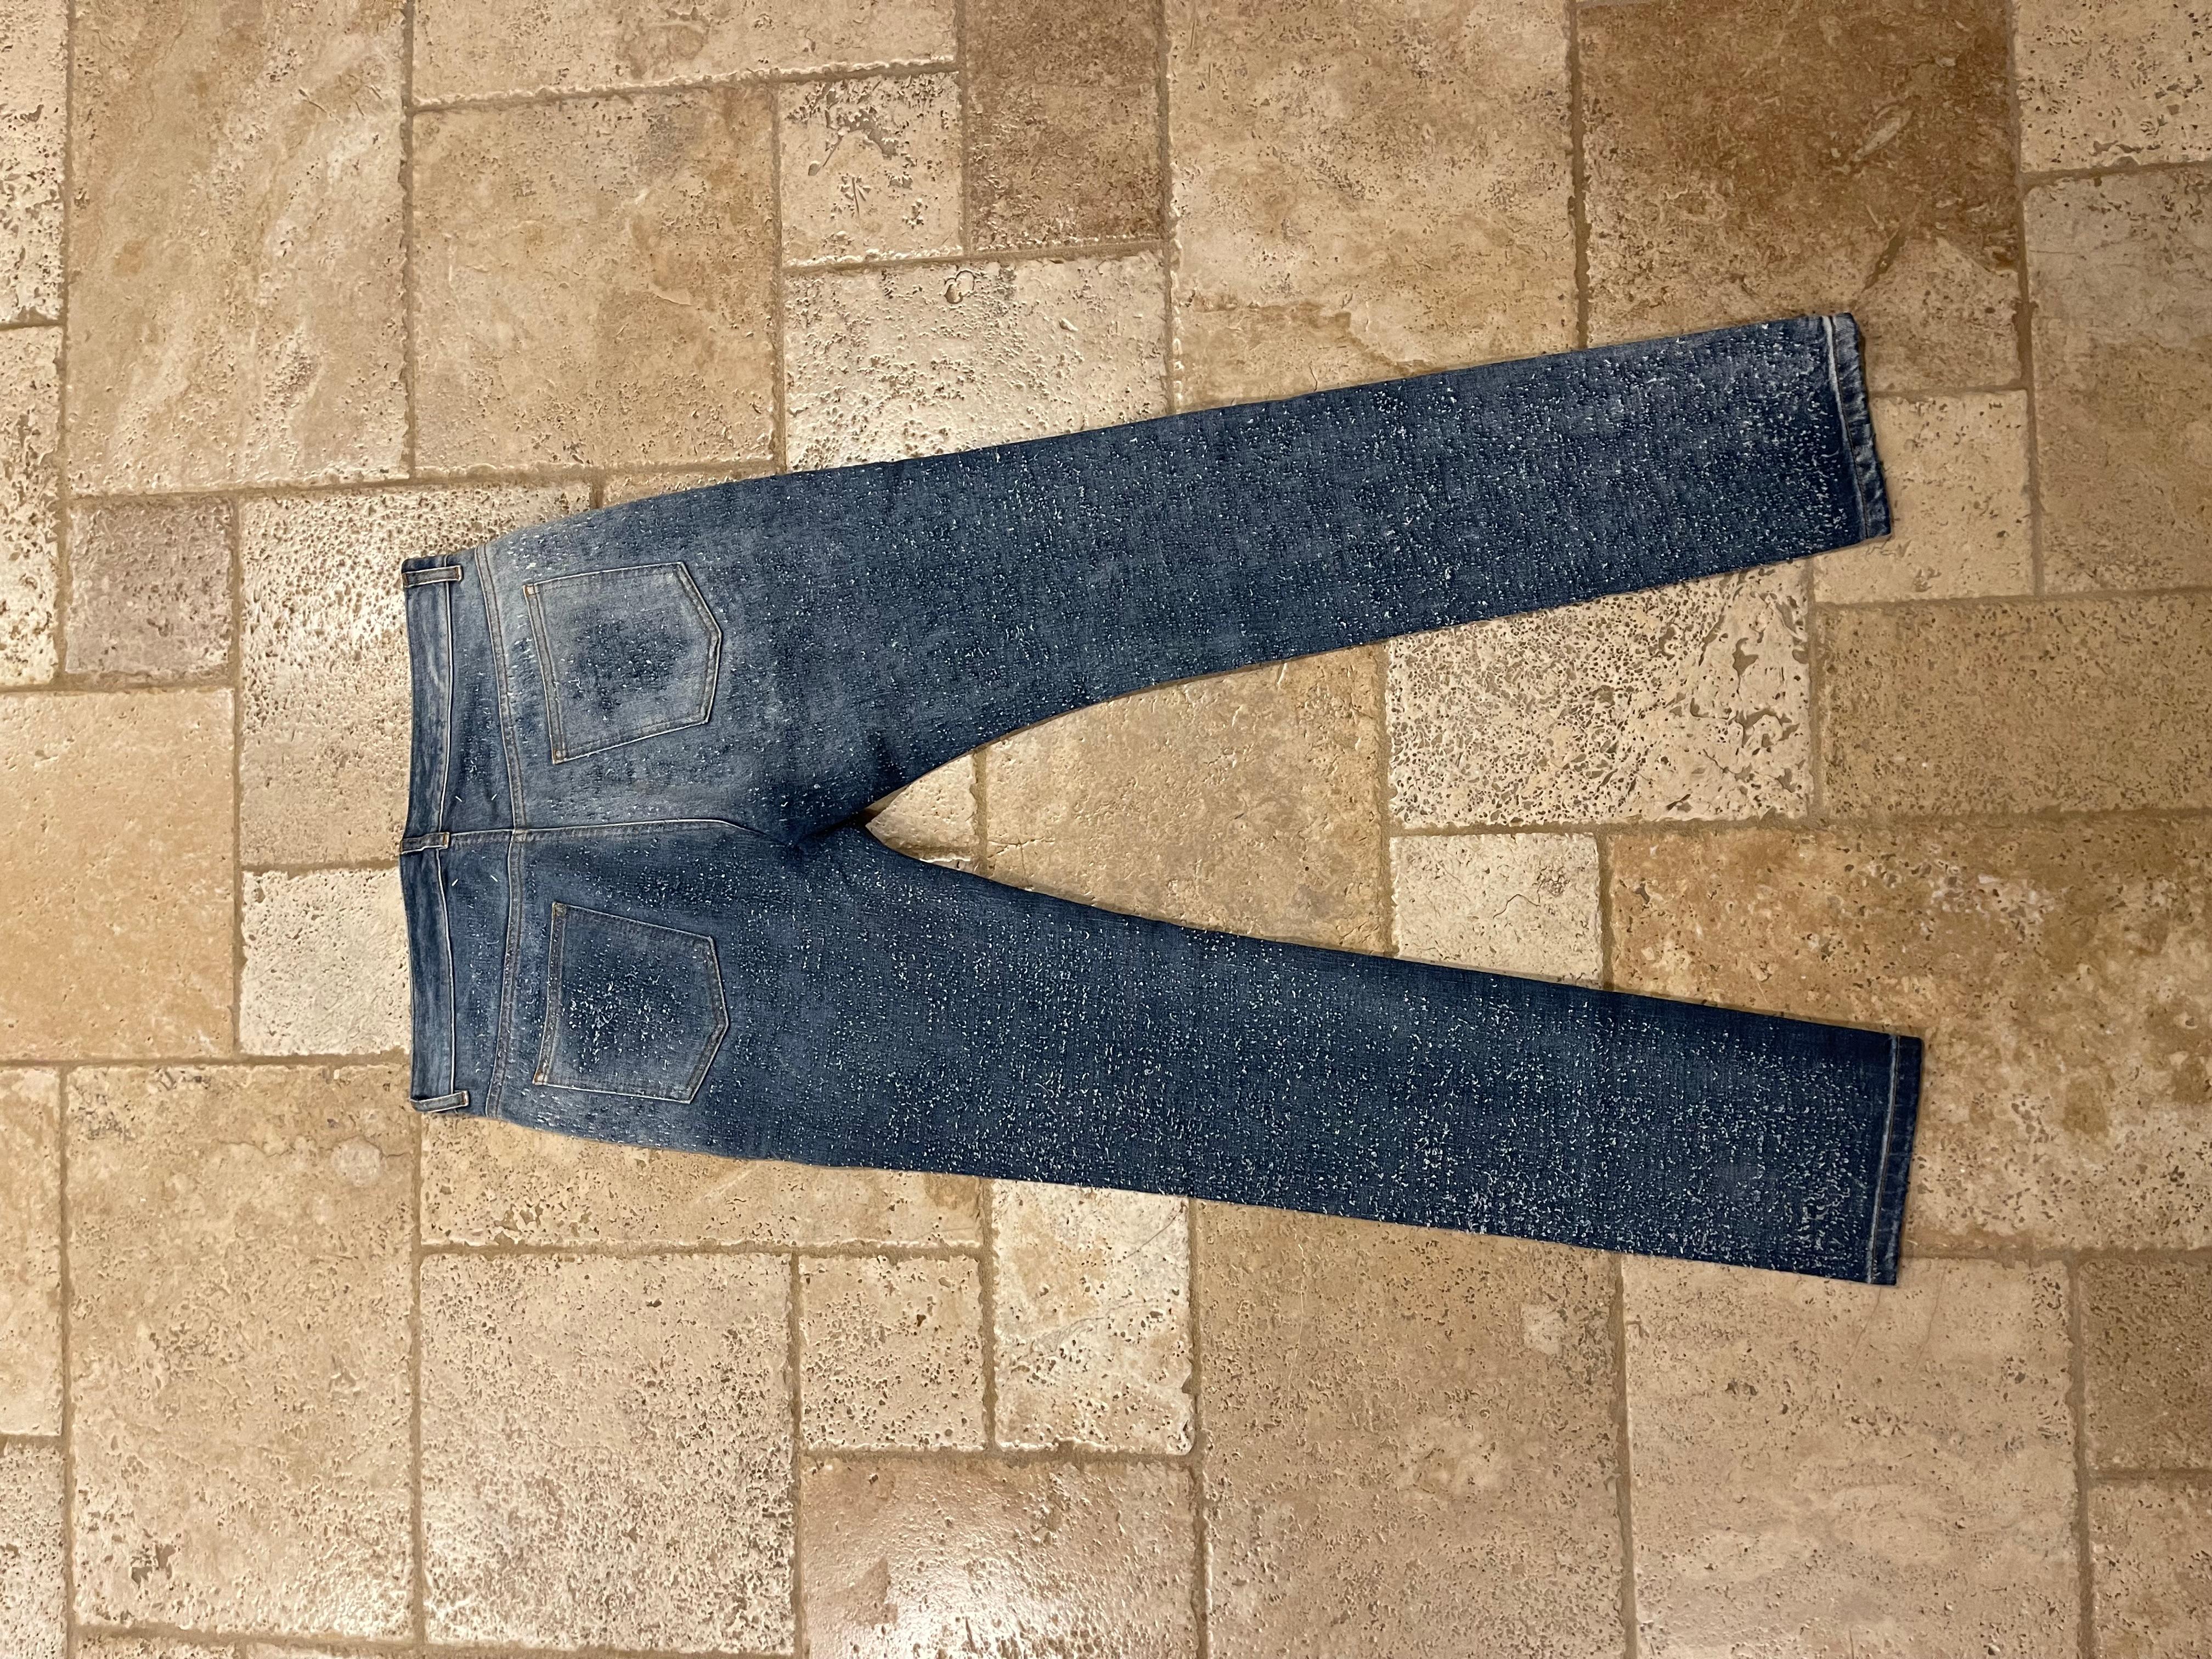 Maison Margiela SS15 Pilled Denim Jeans
Size 50 (could fit US 32/33)
Brand new

As seen on Kanye West

Measurements:
Waist: 17.5